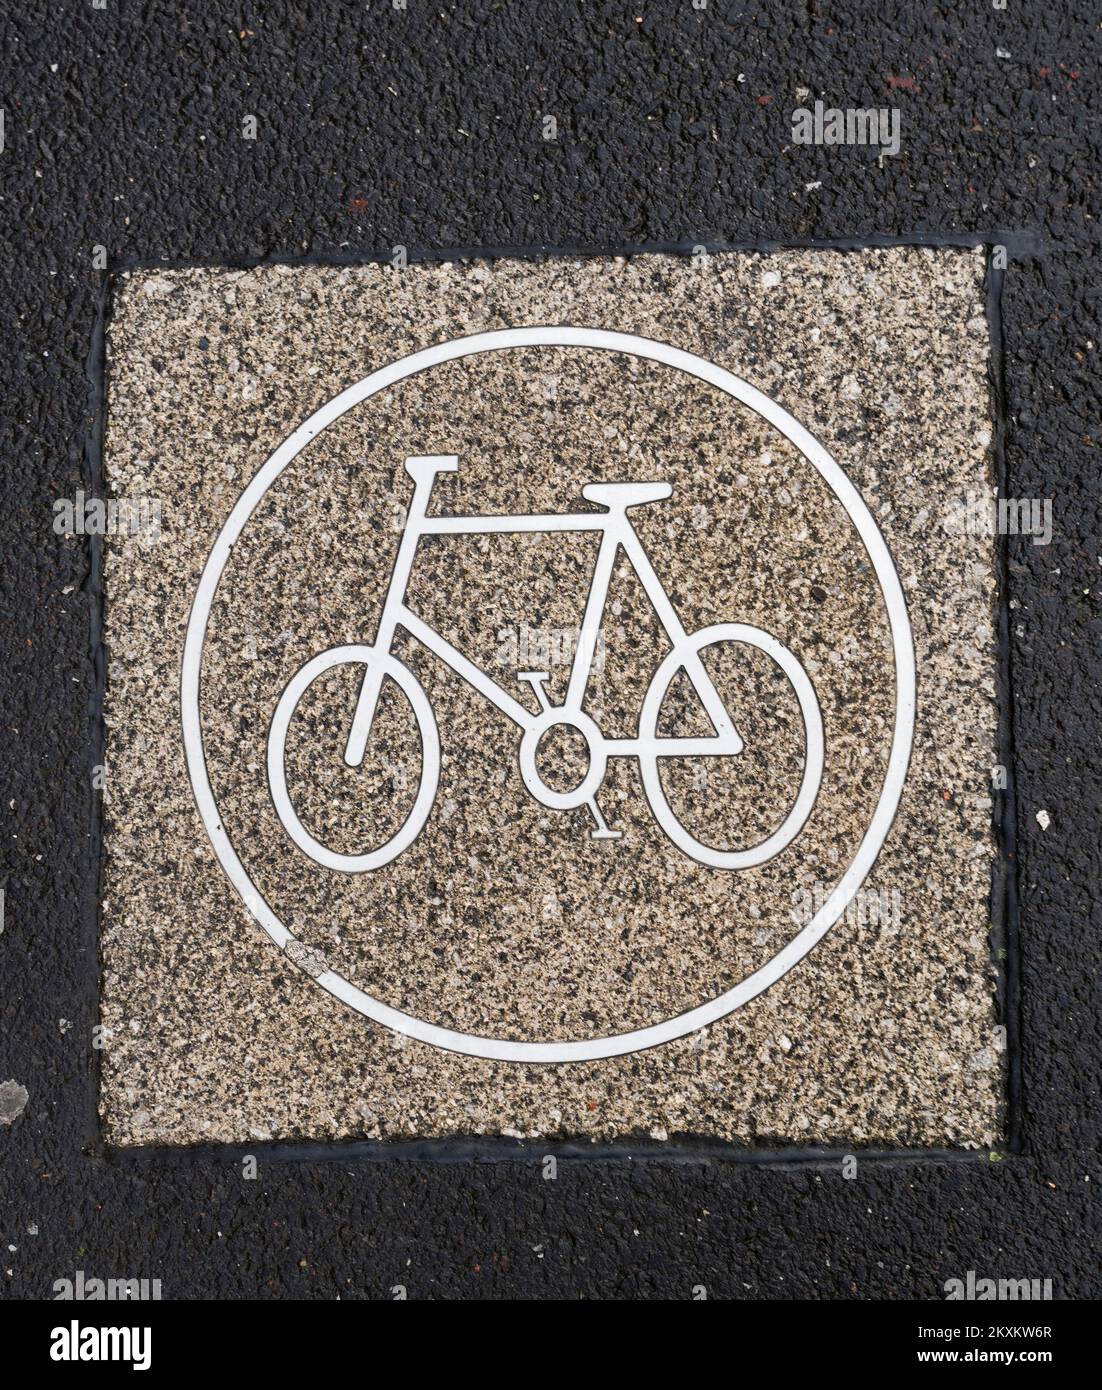 Cycling sign marking route for cyclists at Gateshead, UK Stock Photo